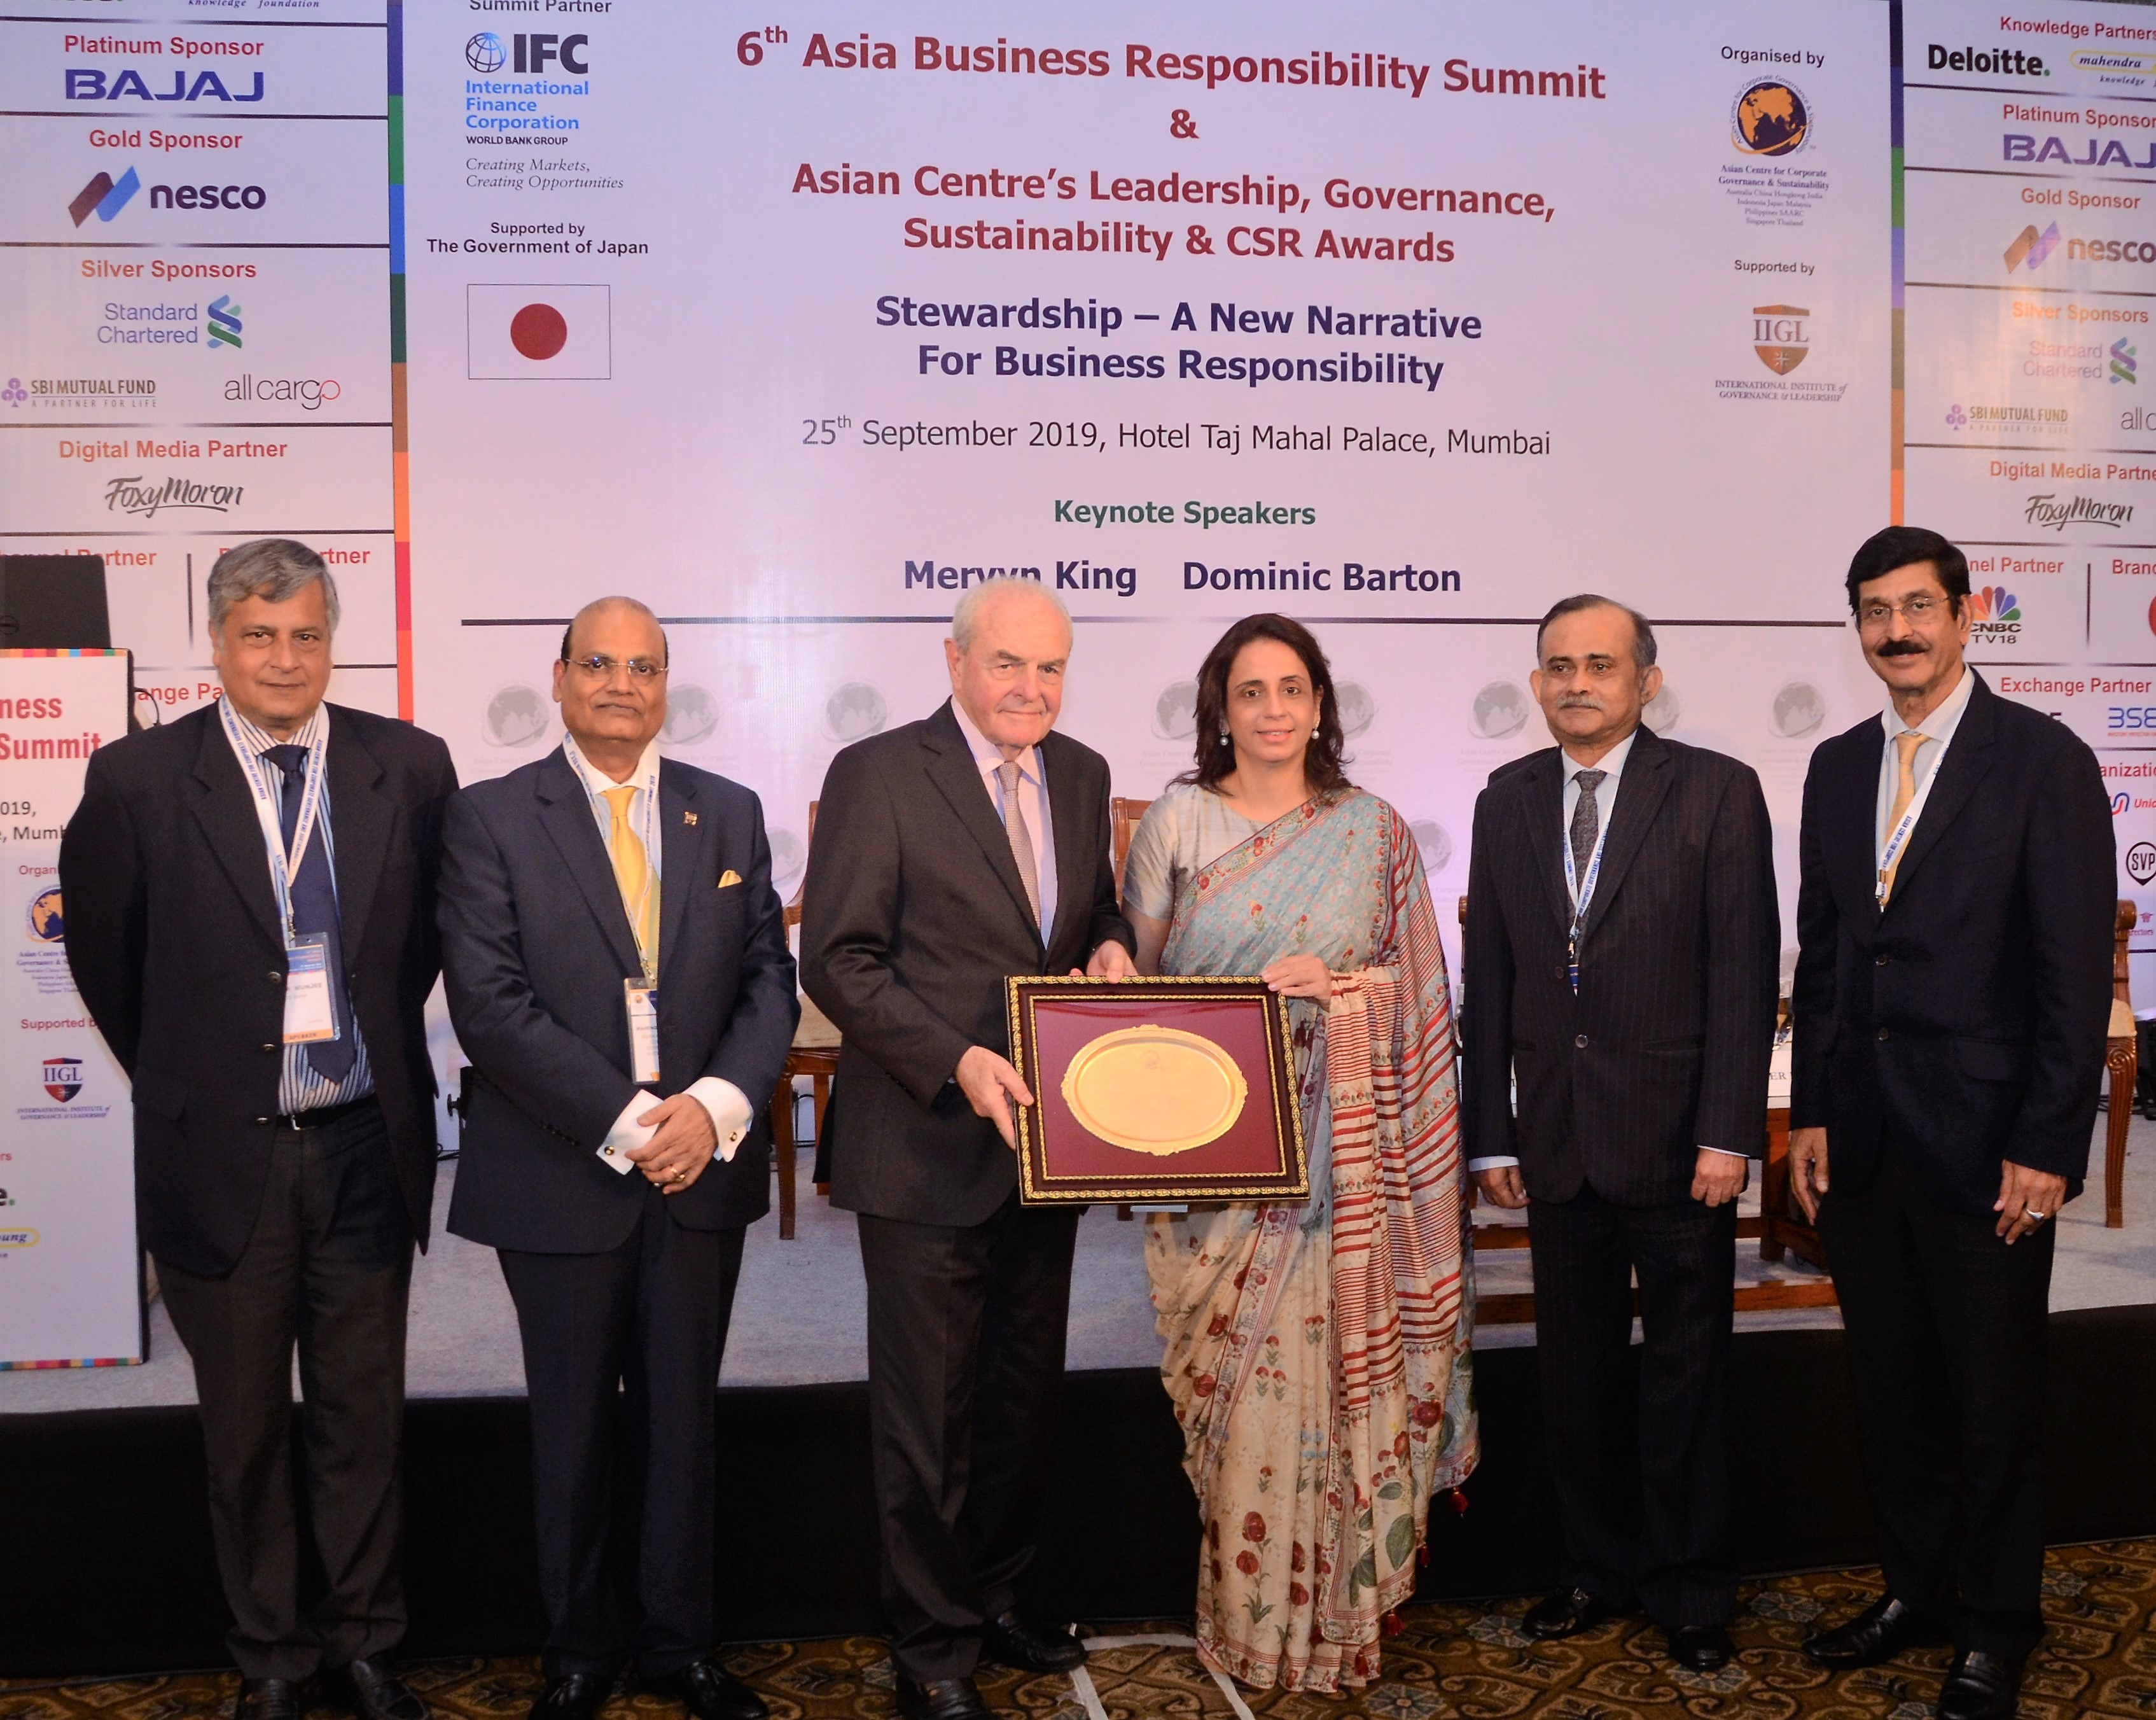 'Best Audit Committee' Award for the Year 2018 by the Asian Centre for Corporate Governance & Sustainability